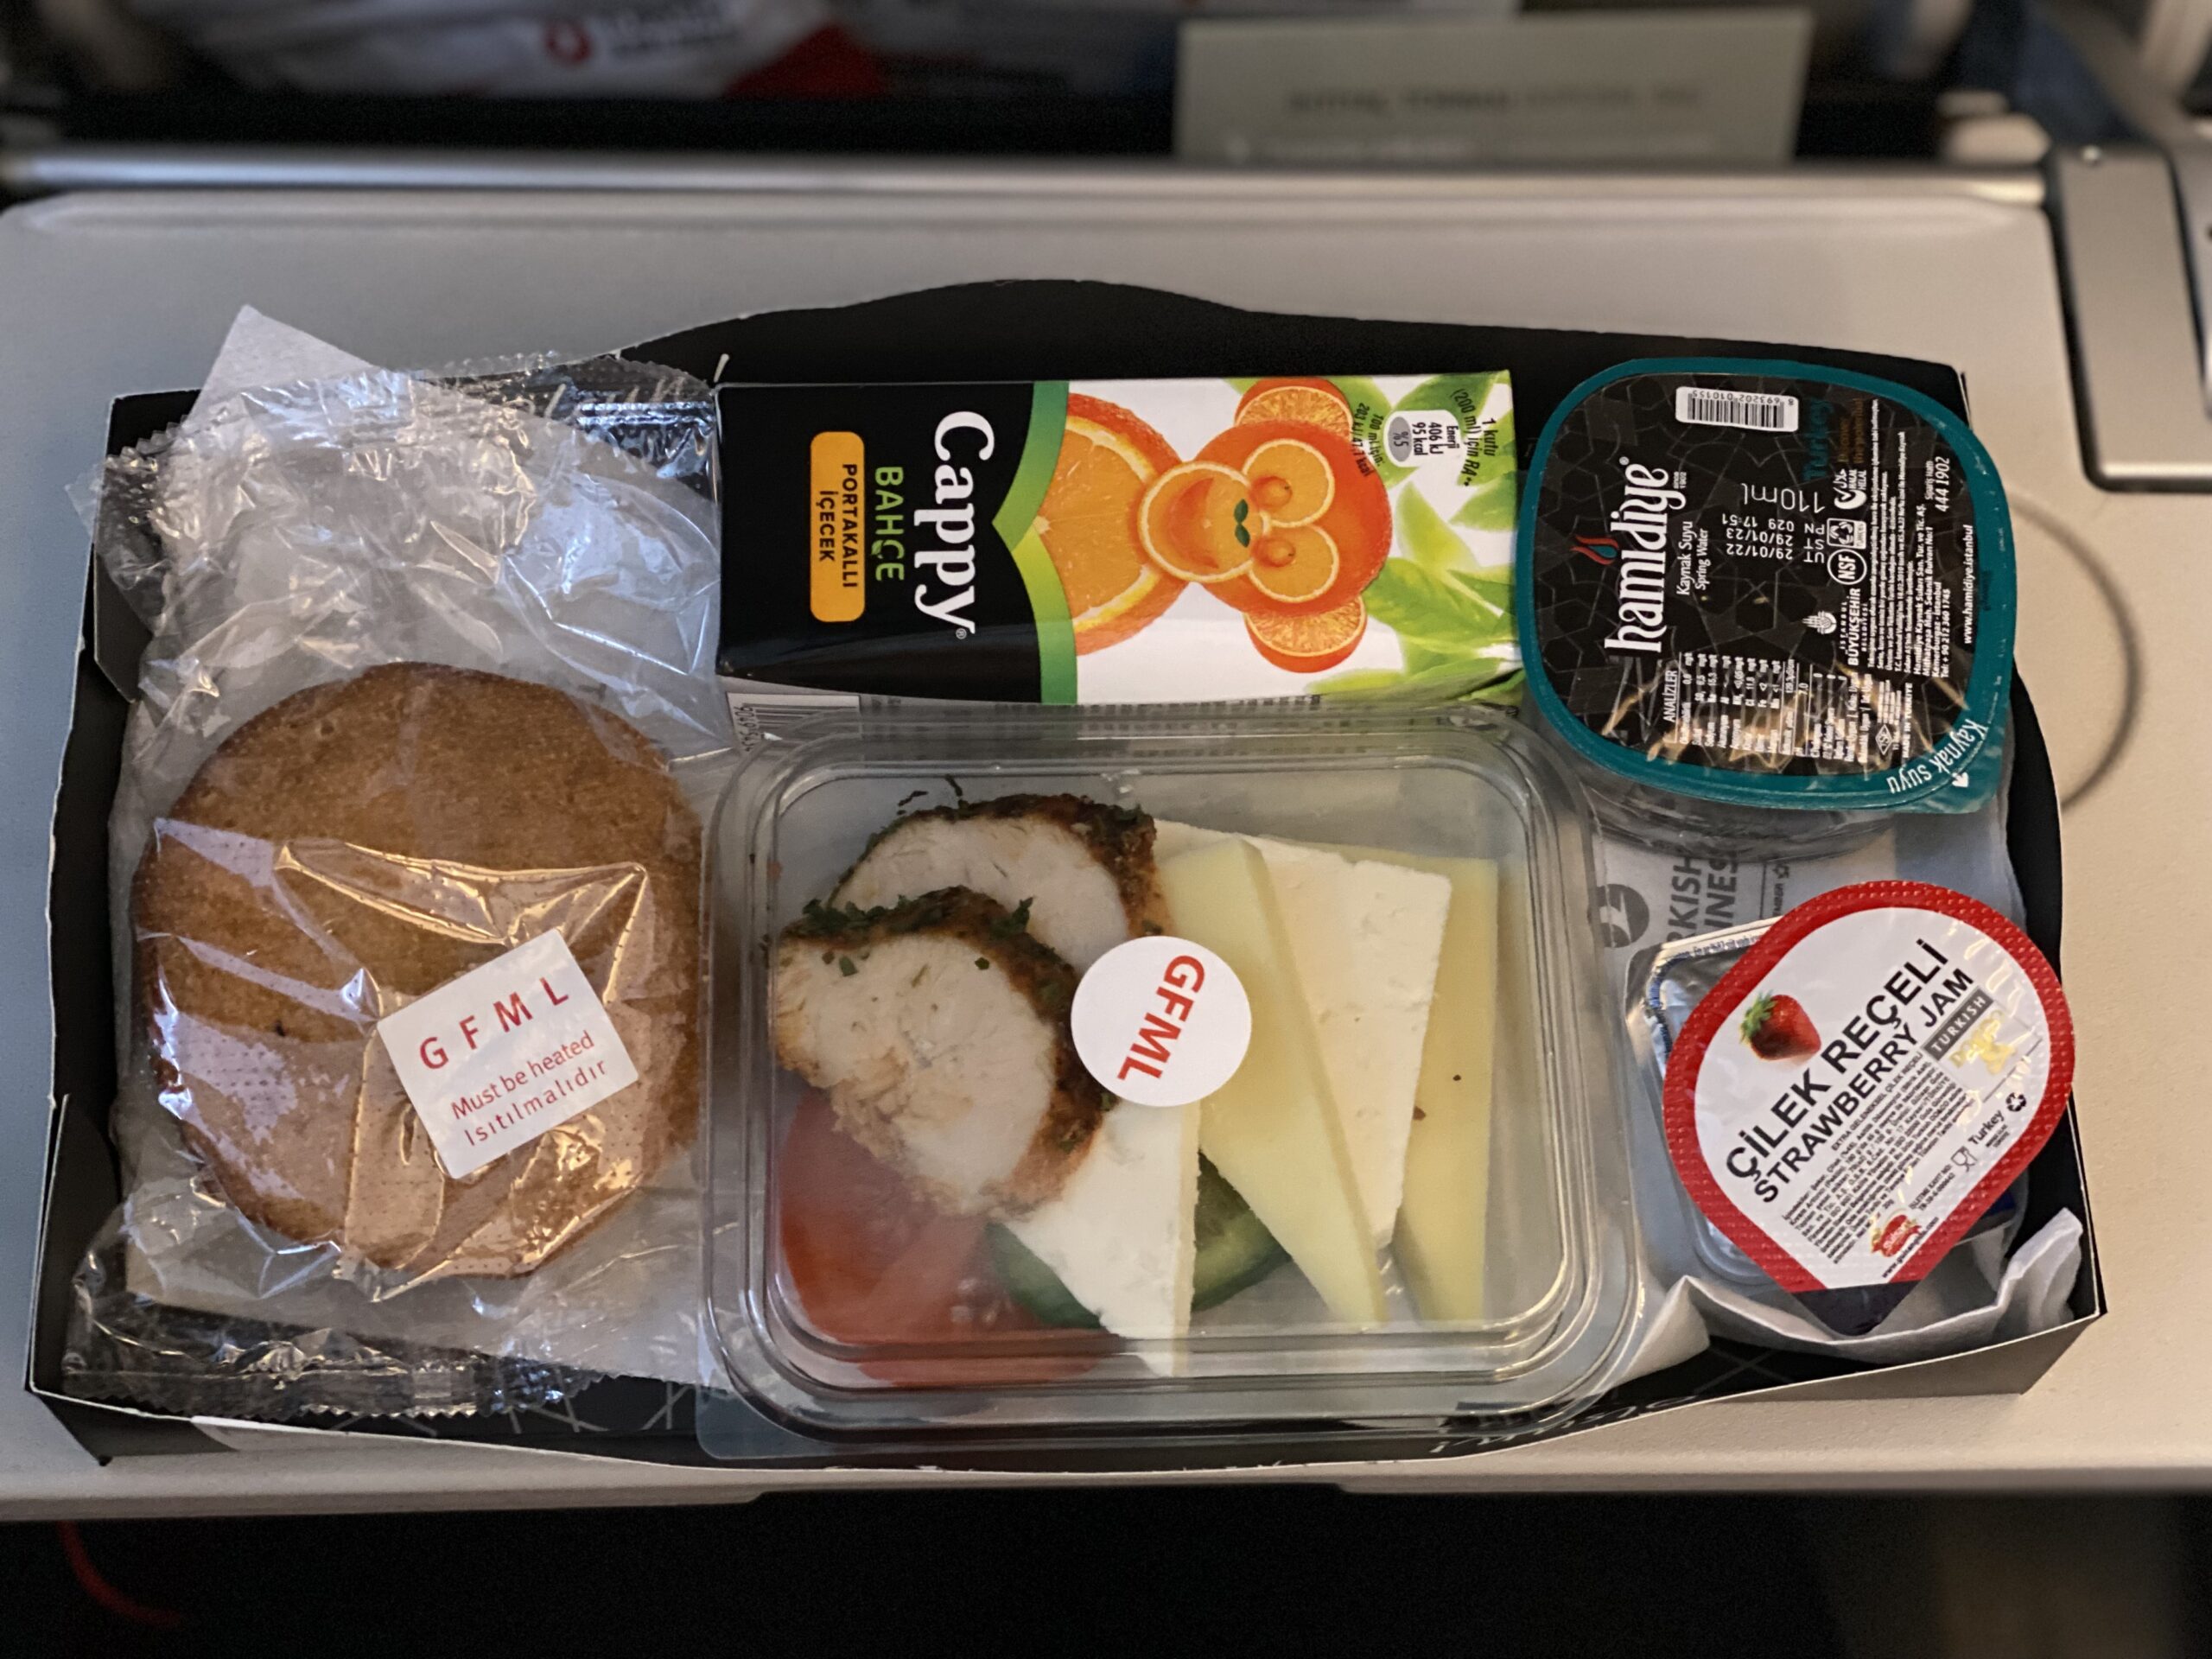 Turkish airlines- GF meal